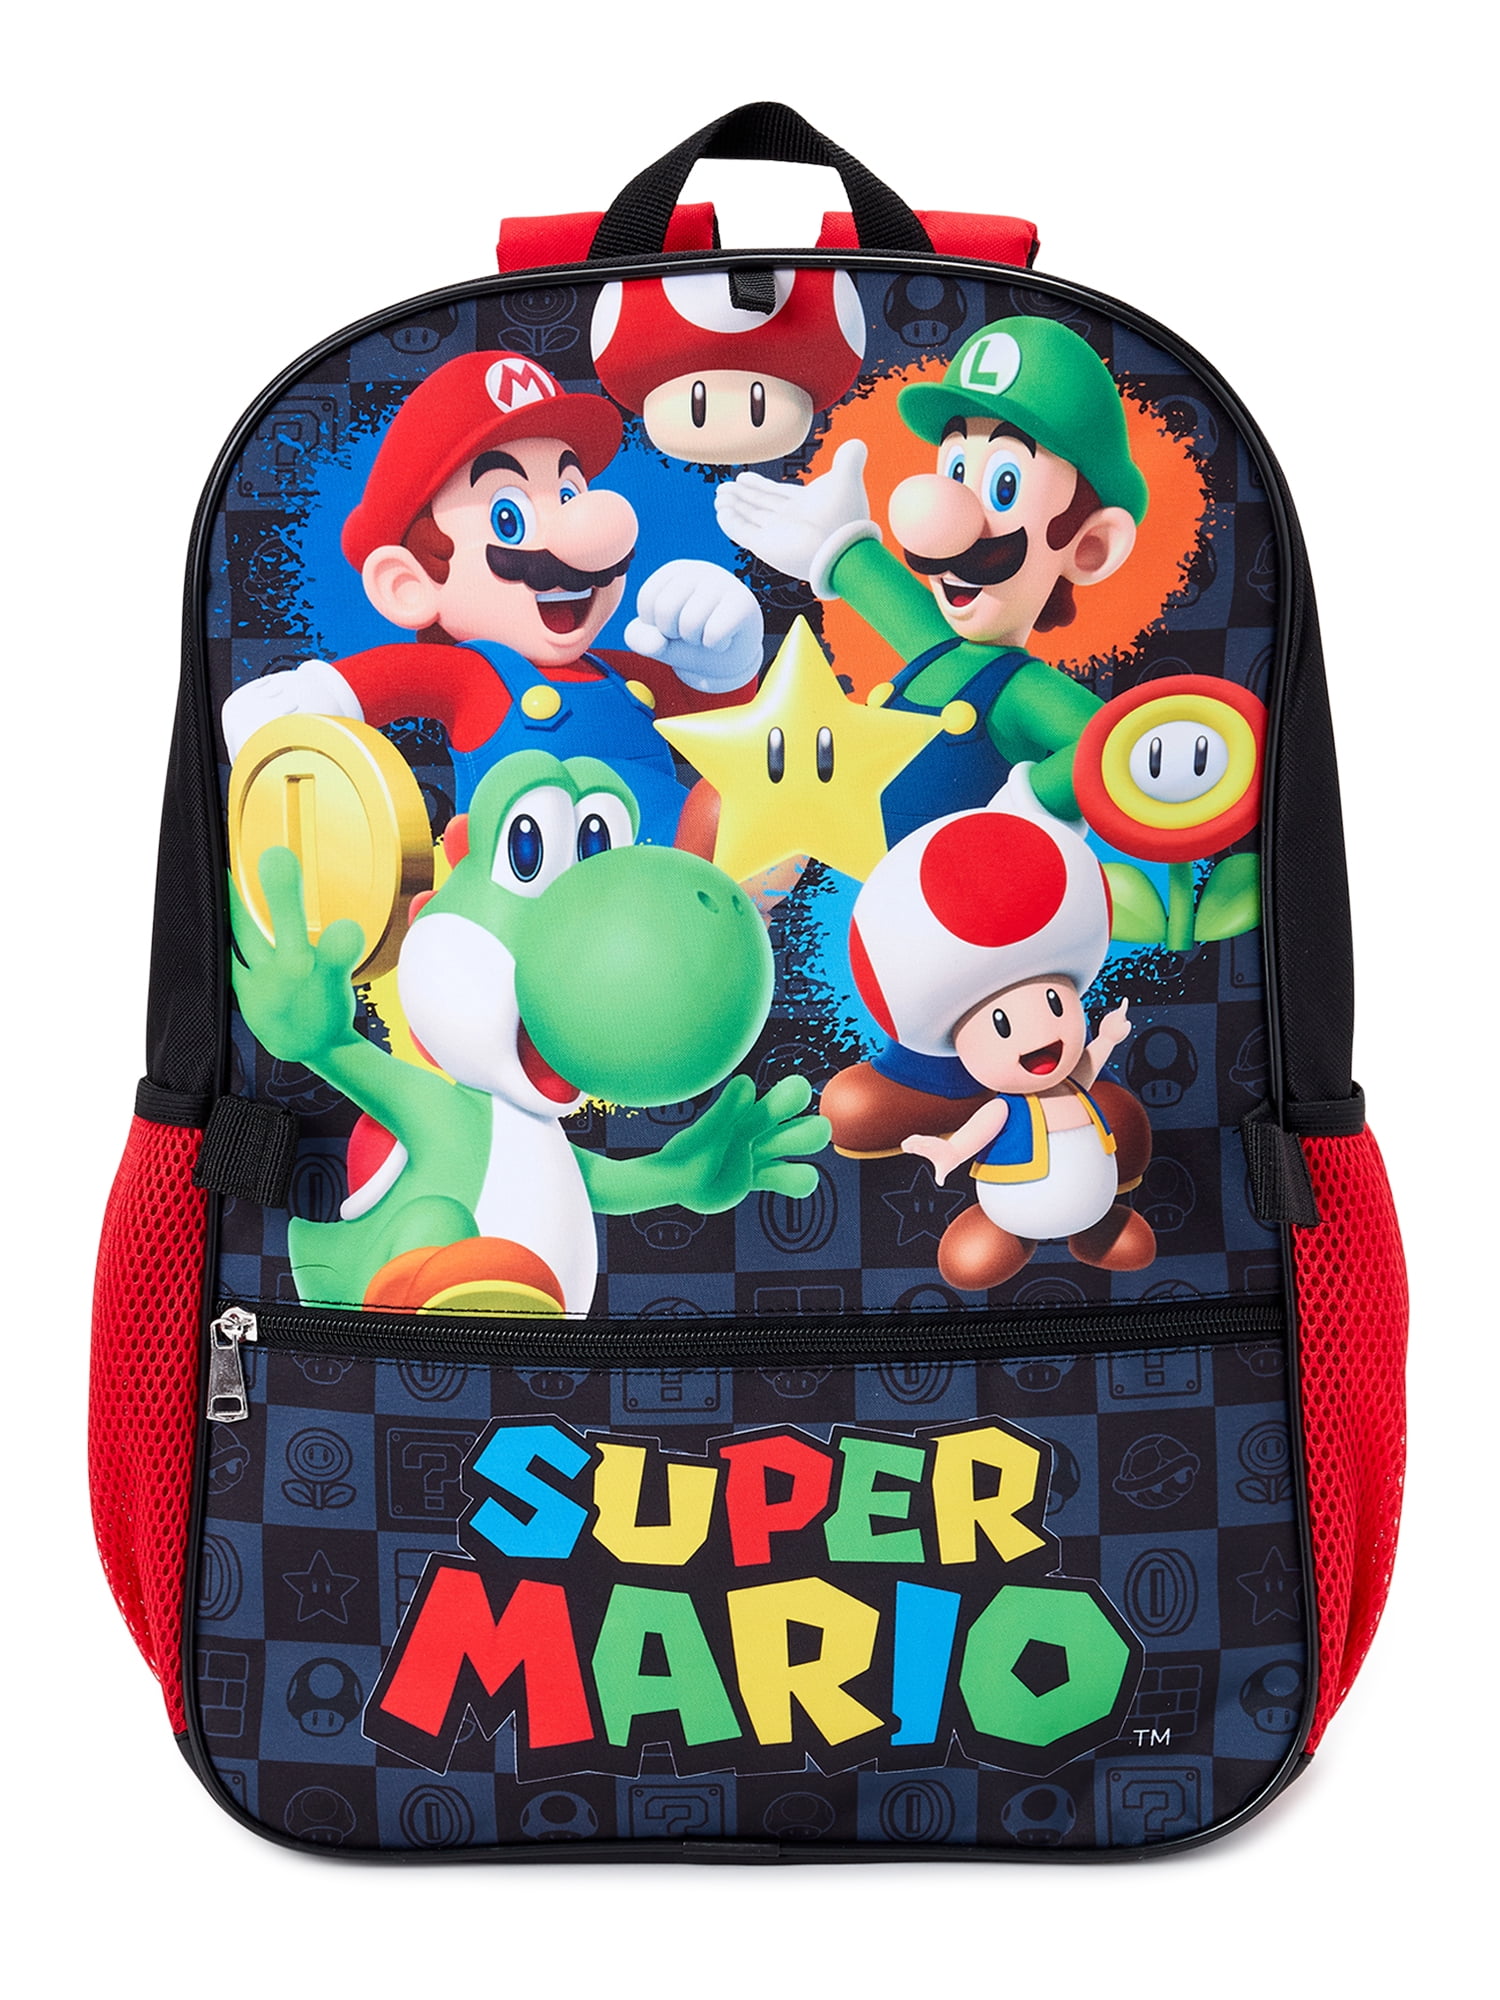 Backpack All Over Character Print 16" School Bag Super Mario Bros 